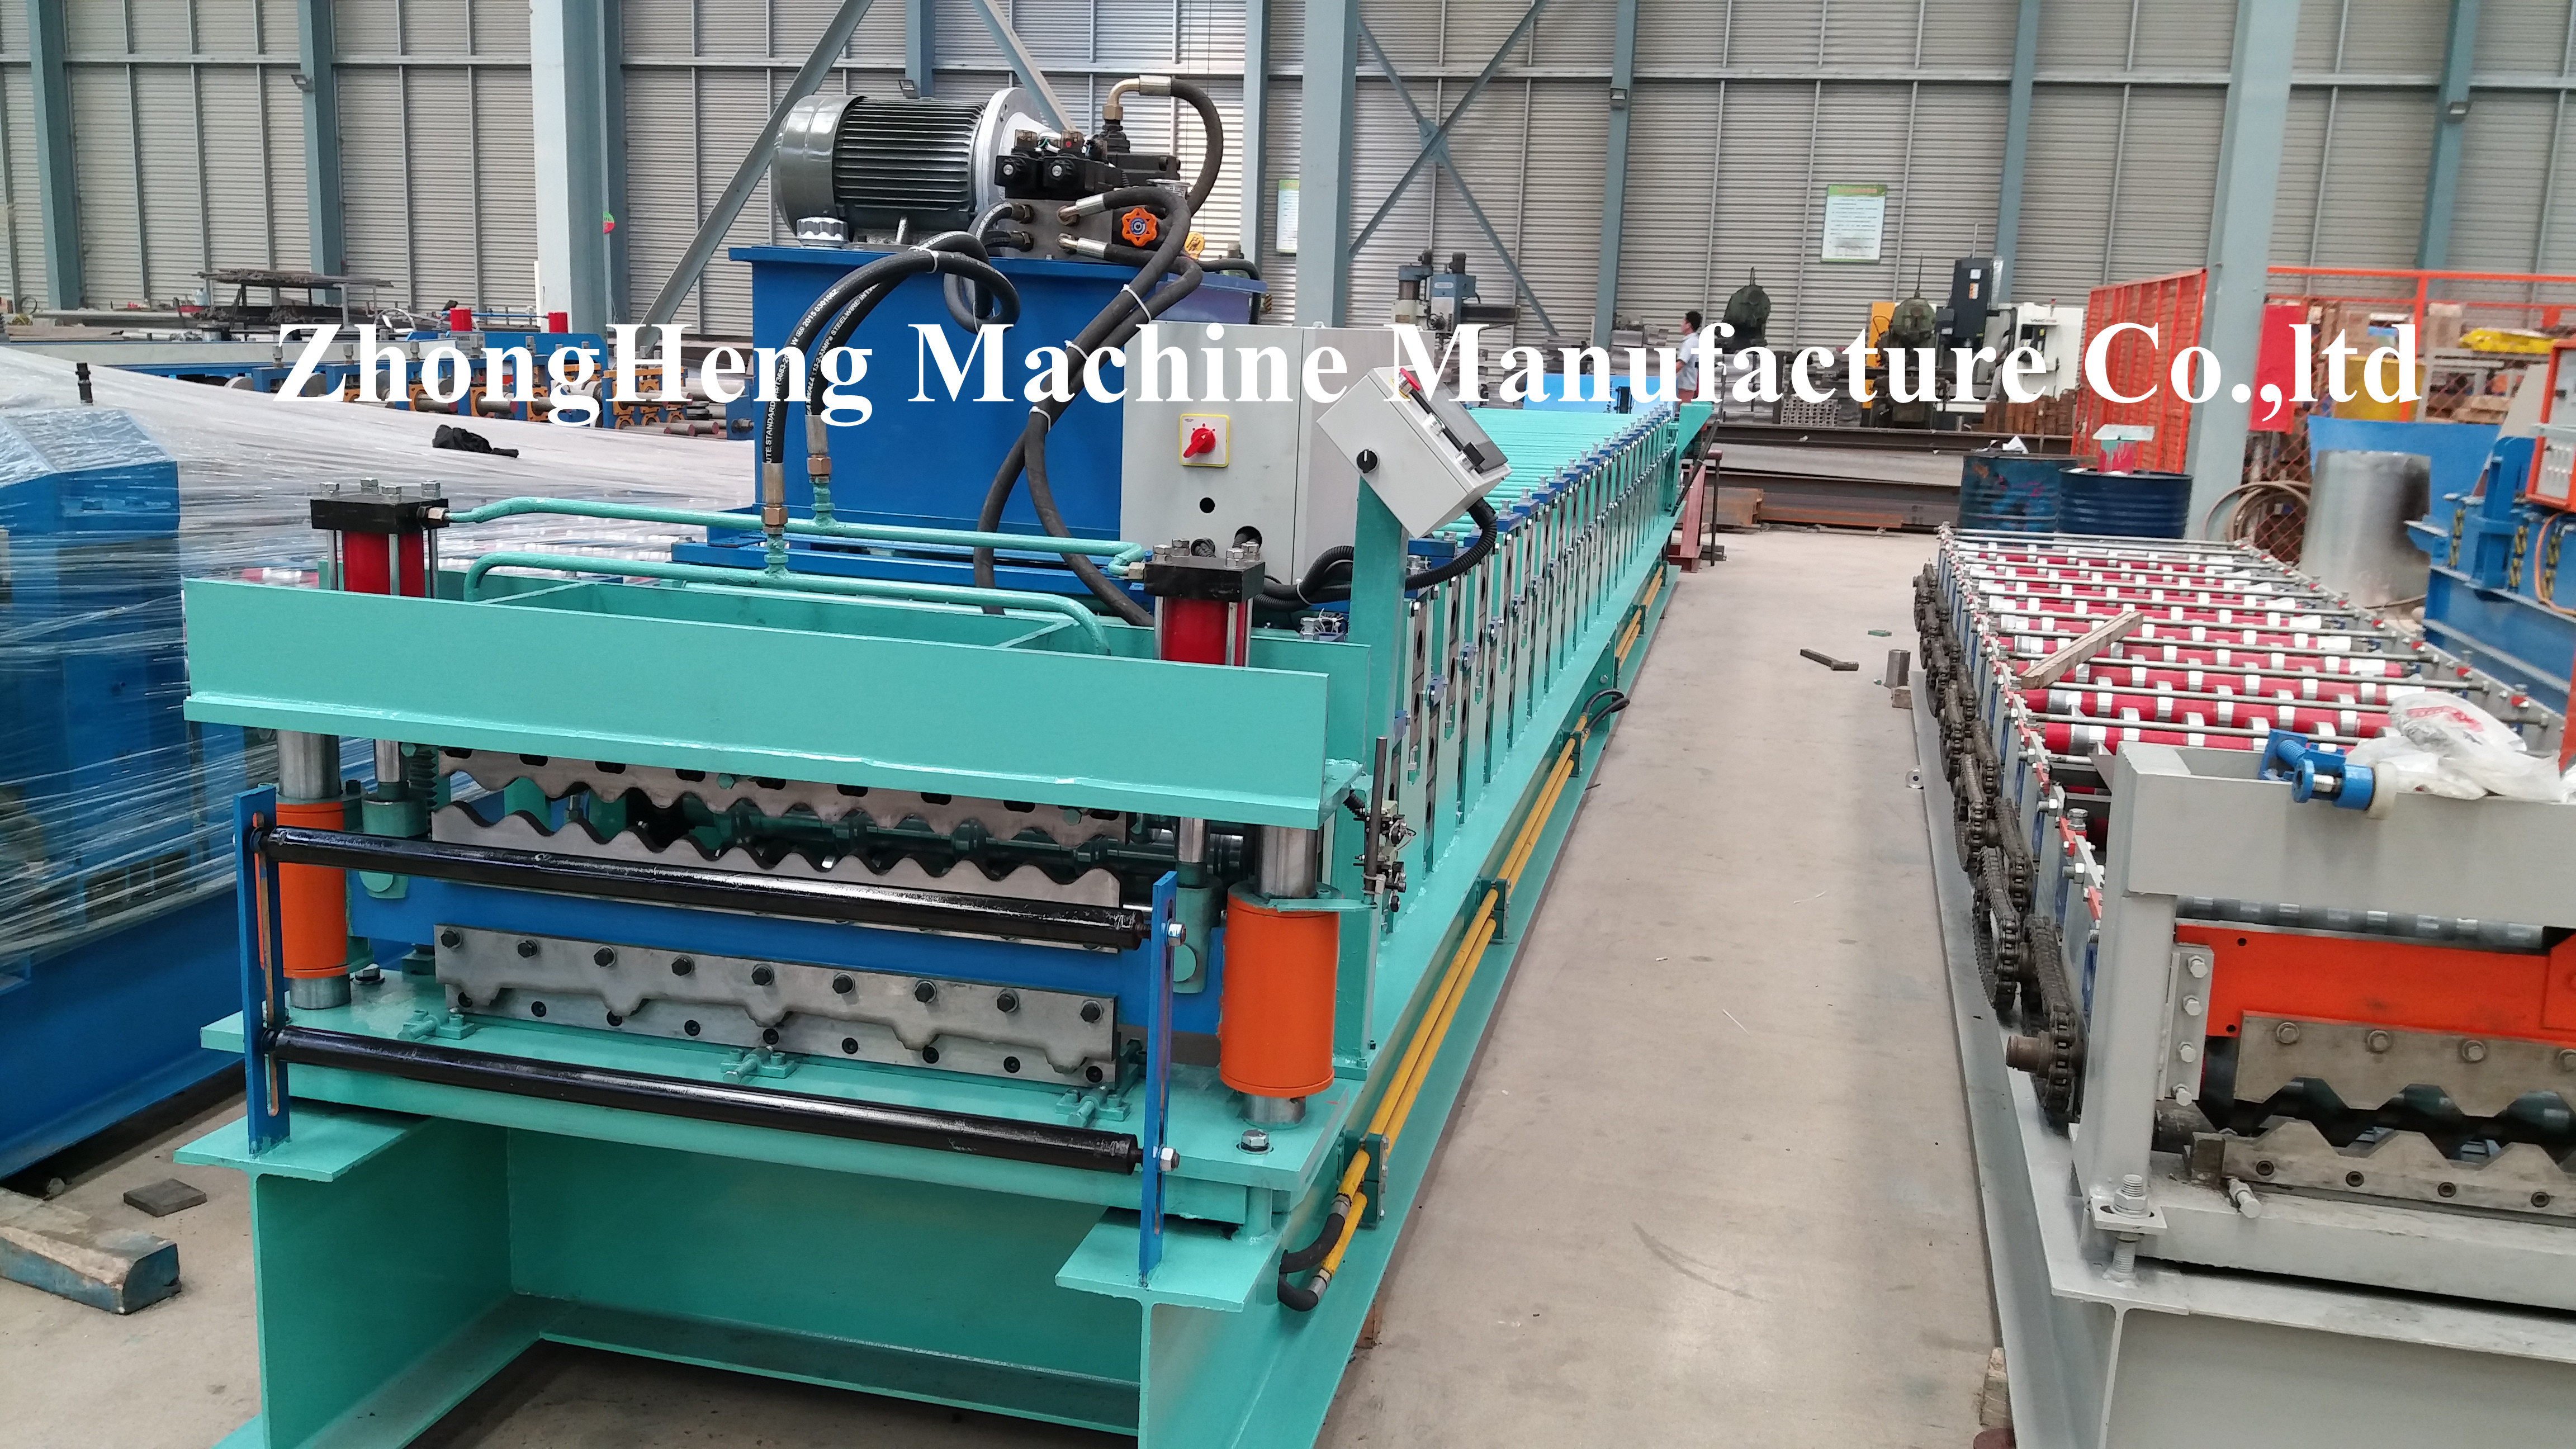 Building Material Roofing Sheet Roll Forming Machine with two different models